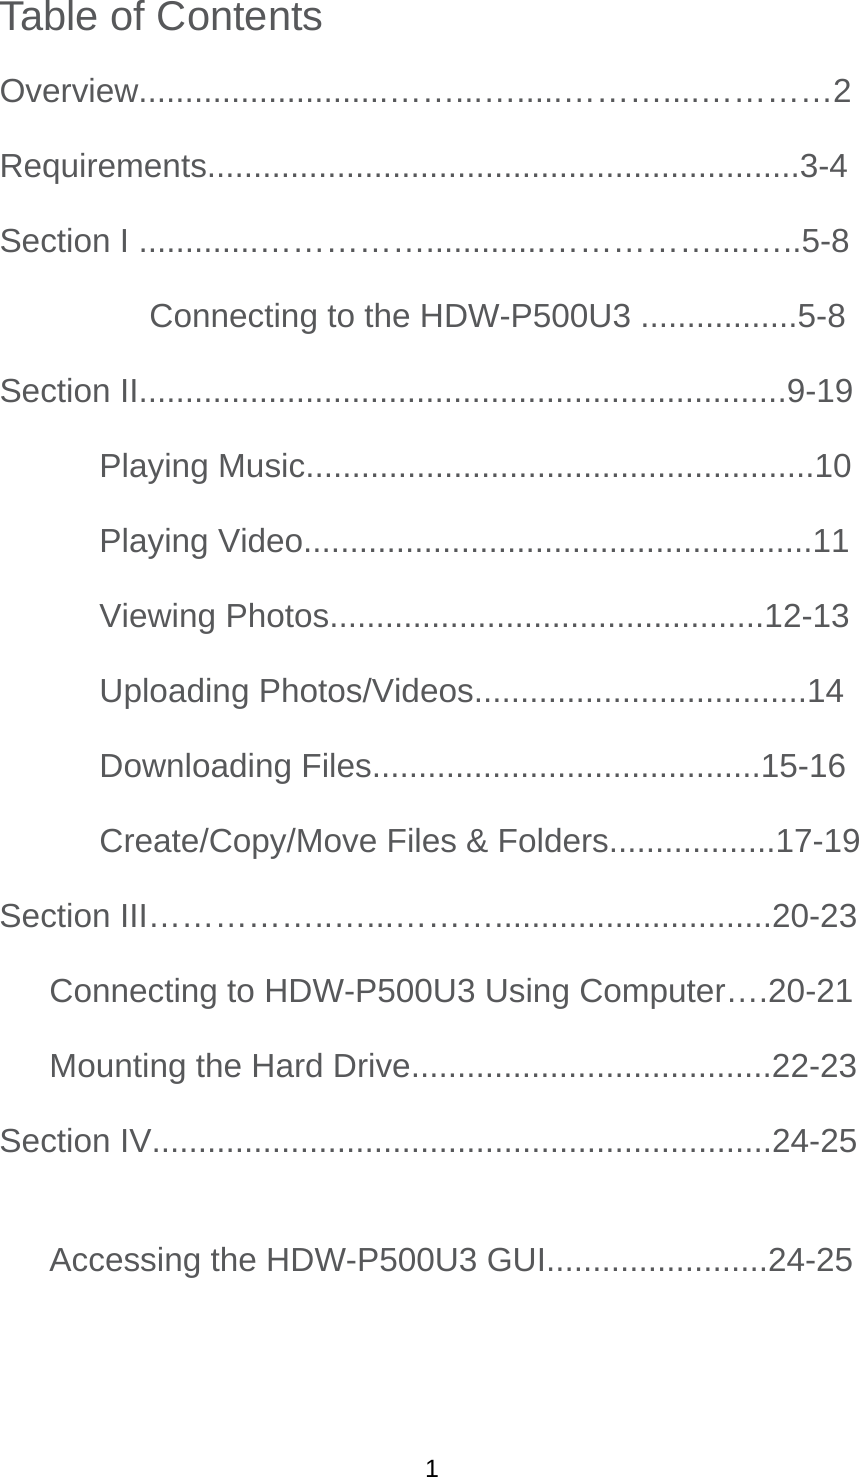 Table of Contents Overview...........................……...….....………....…………2  Requirements................................................................3-4  Section I .............…………….............……………....…..5-8   Connecting to the HDW-P500U3 .................5-8   Section II......................................................................9-19  Playing Music.......................................................10   Playing Video.......................................................11  Viewing Photos...............................................12-13   Uploading Photos/Videos....................................14   Downloading Files..........................................15-16   Create/Copy/Move Files &amp; Folders..................17-19 Section III……………..…...………..............................20-23 Connecting to HDW-P500U3 Using Computer….20-21 Mounting the Hard Drive.......................................22-23 Section IV...................................................................24-25 Accessing the HDW-P500U3 GUI........................24-25   1